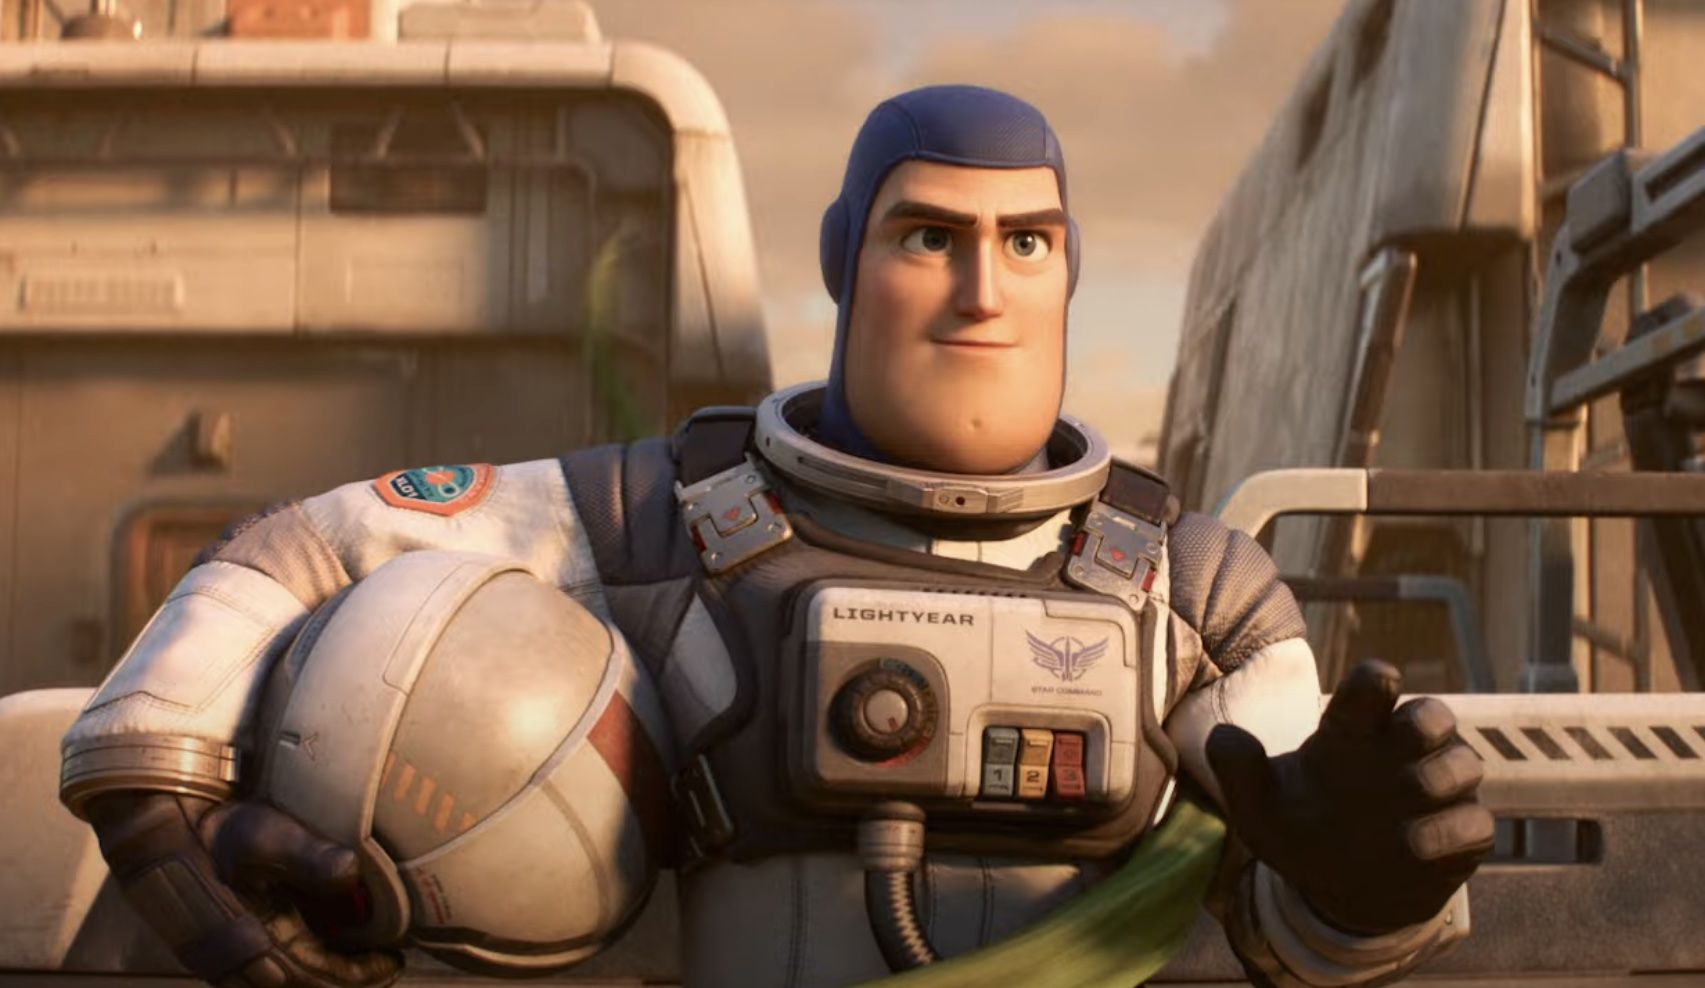 Buzz and Woody are coming back for Toy Story 5 - Xfire